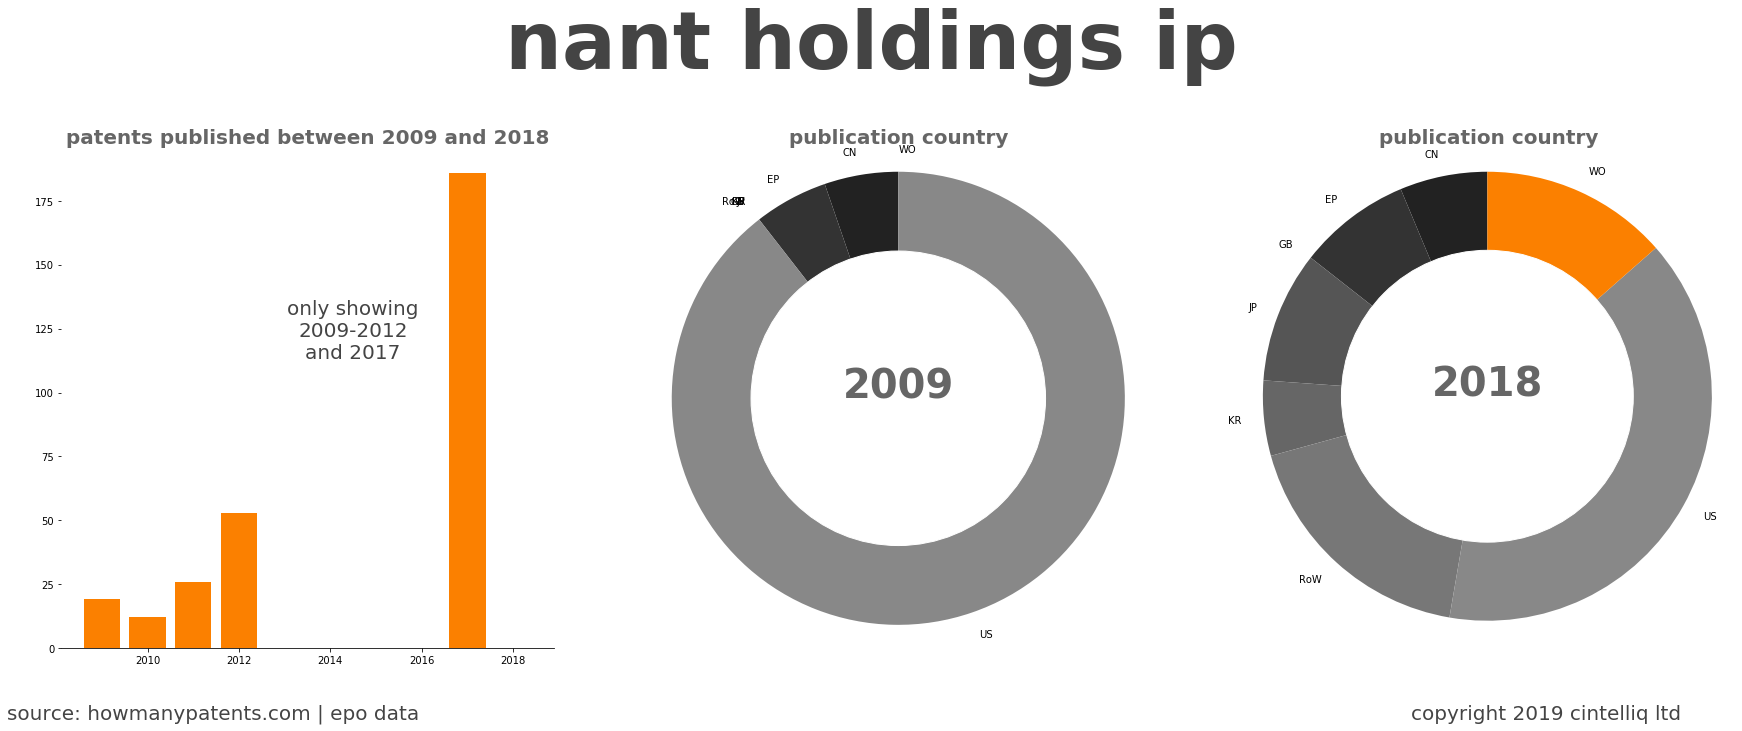 summary of patents for Nant Holdings Ip